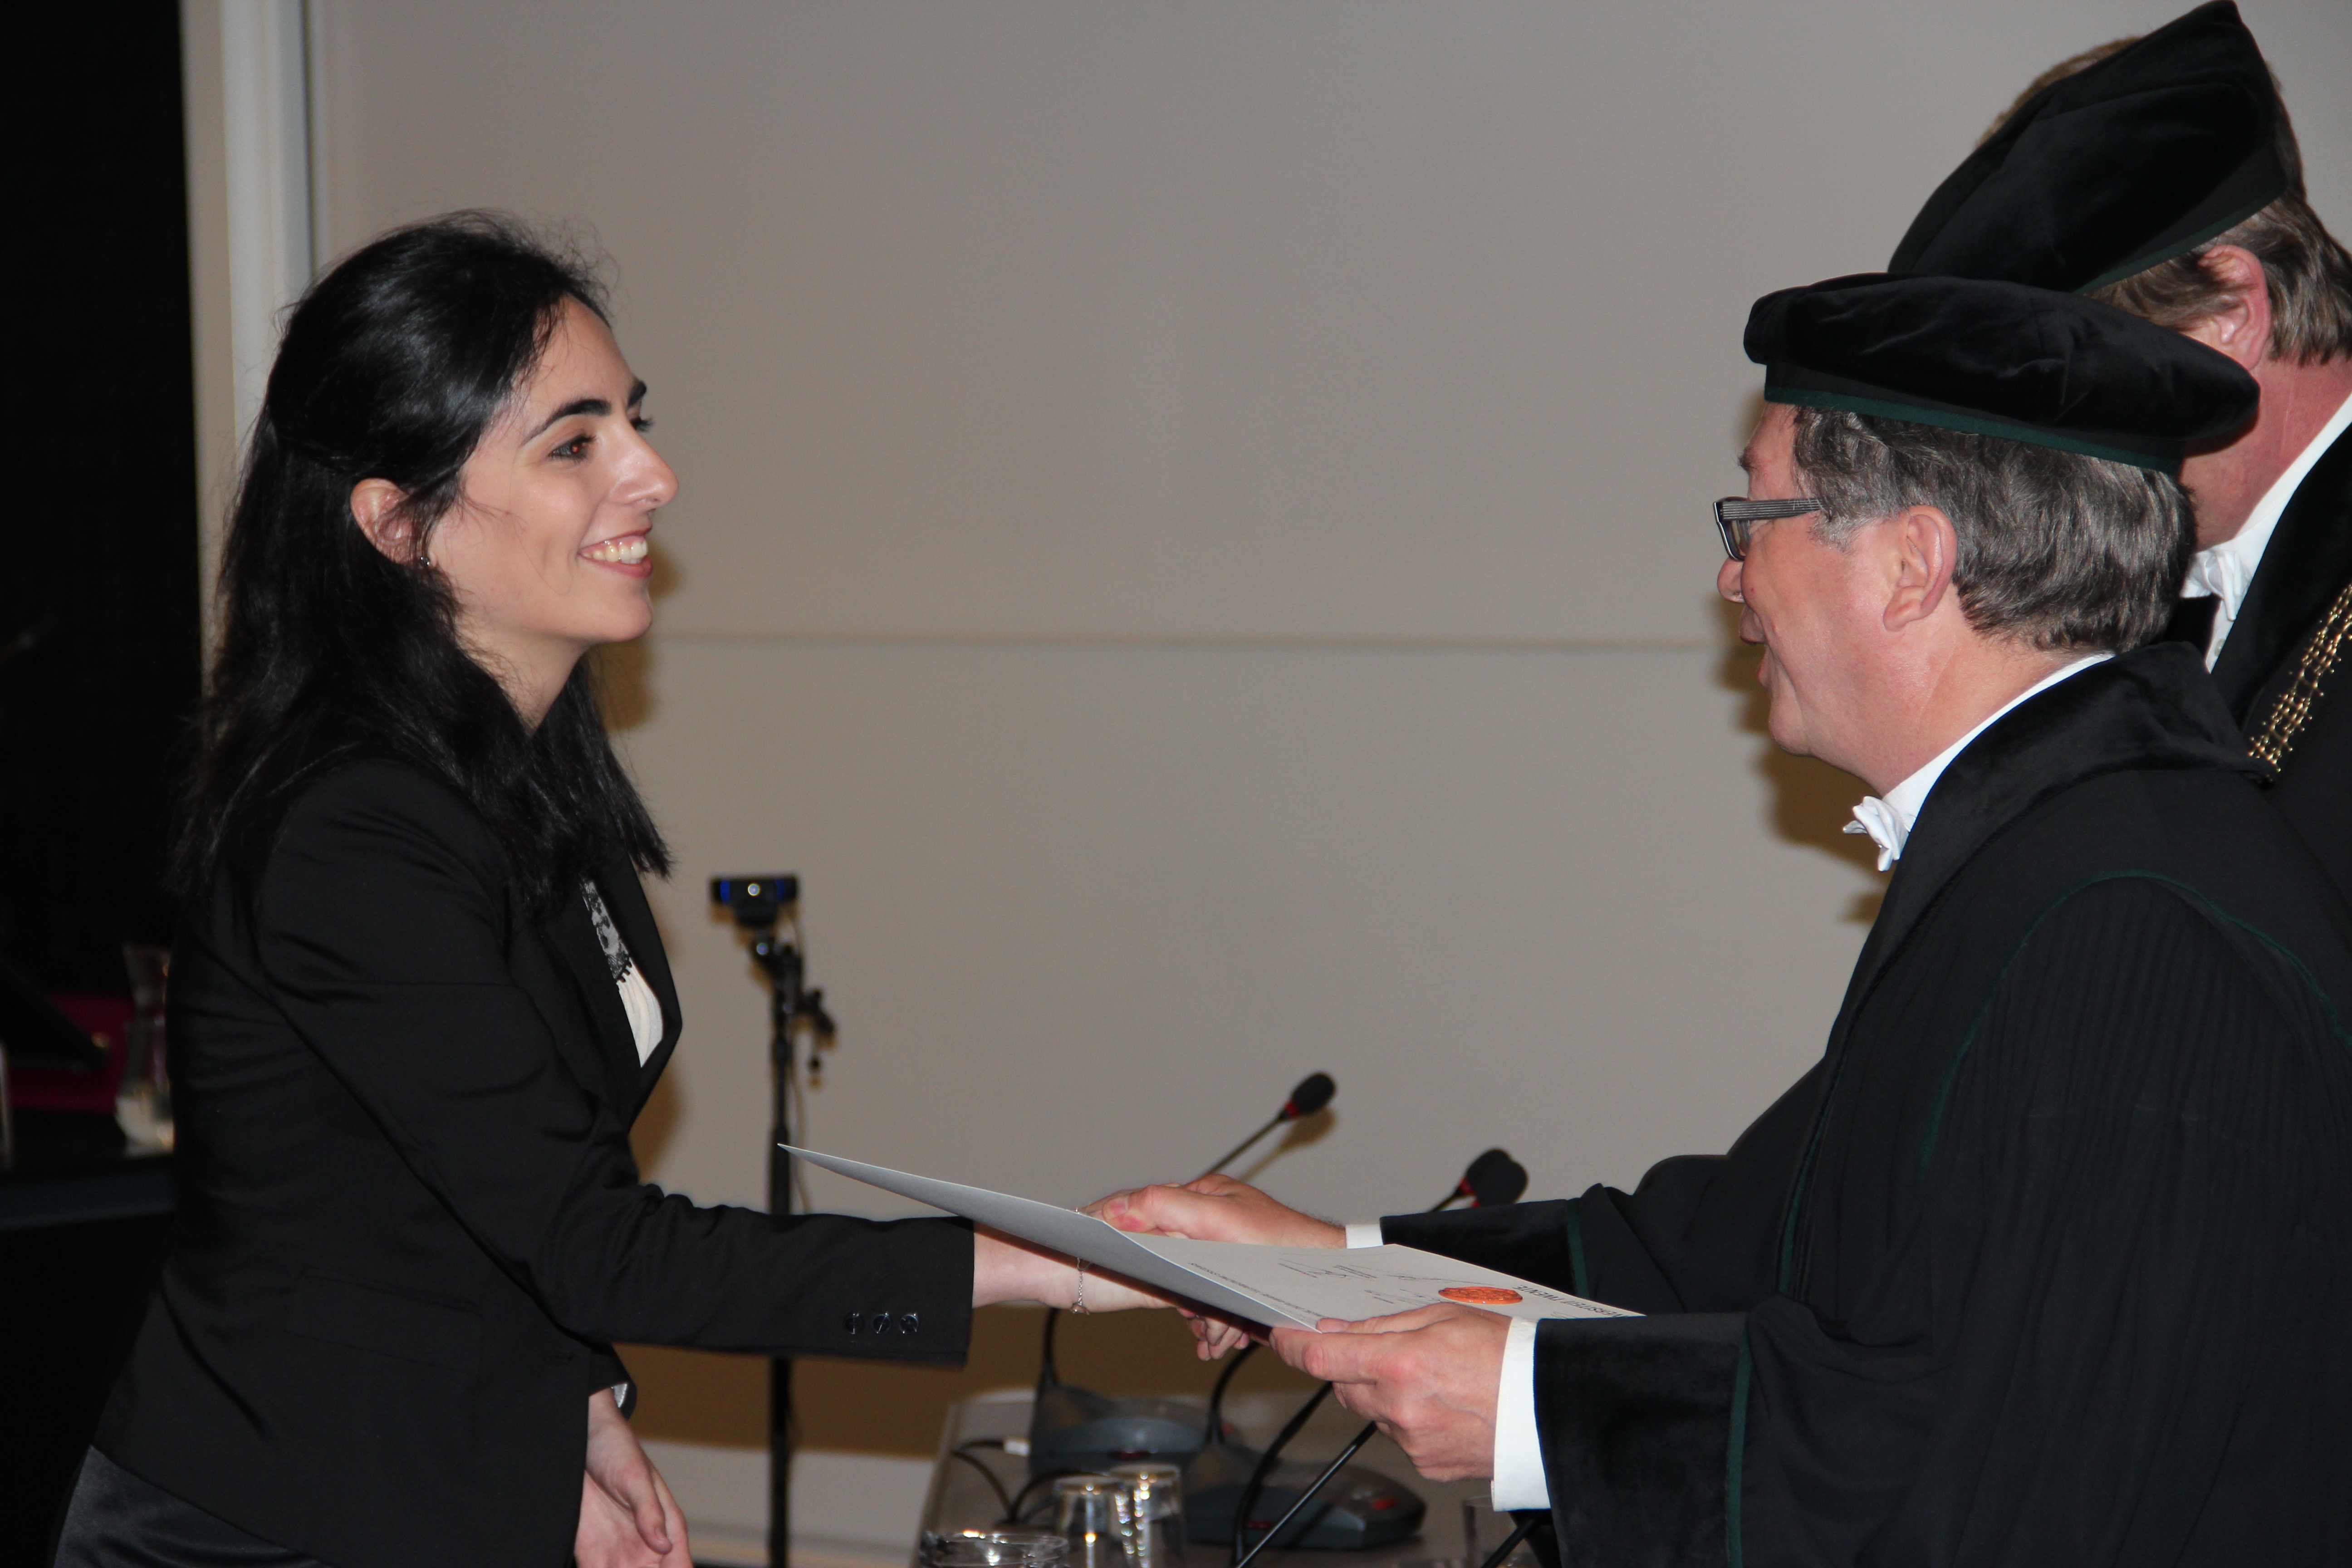 Nekane Larburu Rubio successfully defended her PhD at Univeristy of Twente (The Netherlands), titled Quality of Clinical Data Aware Telemedicine Systems